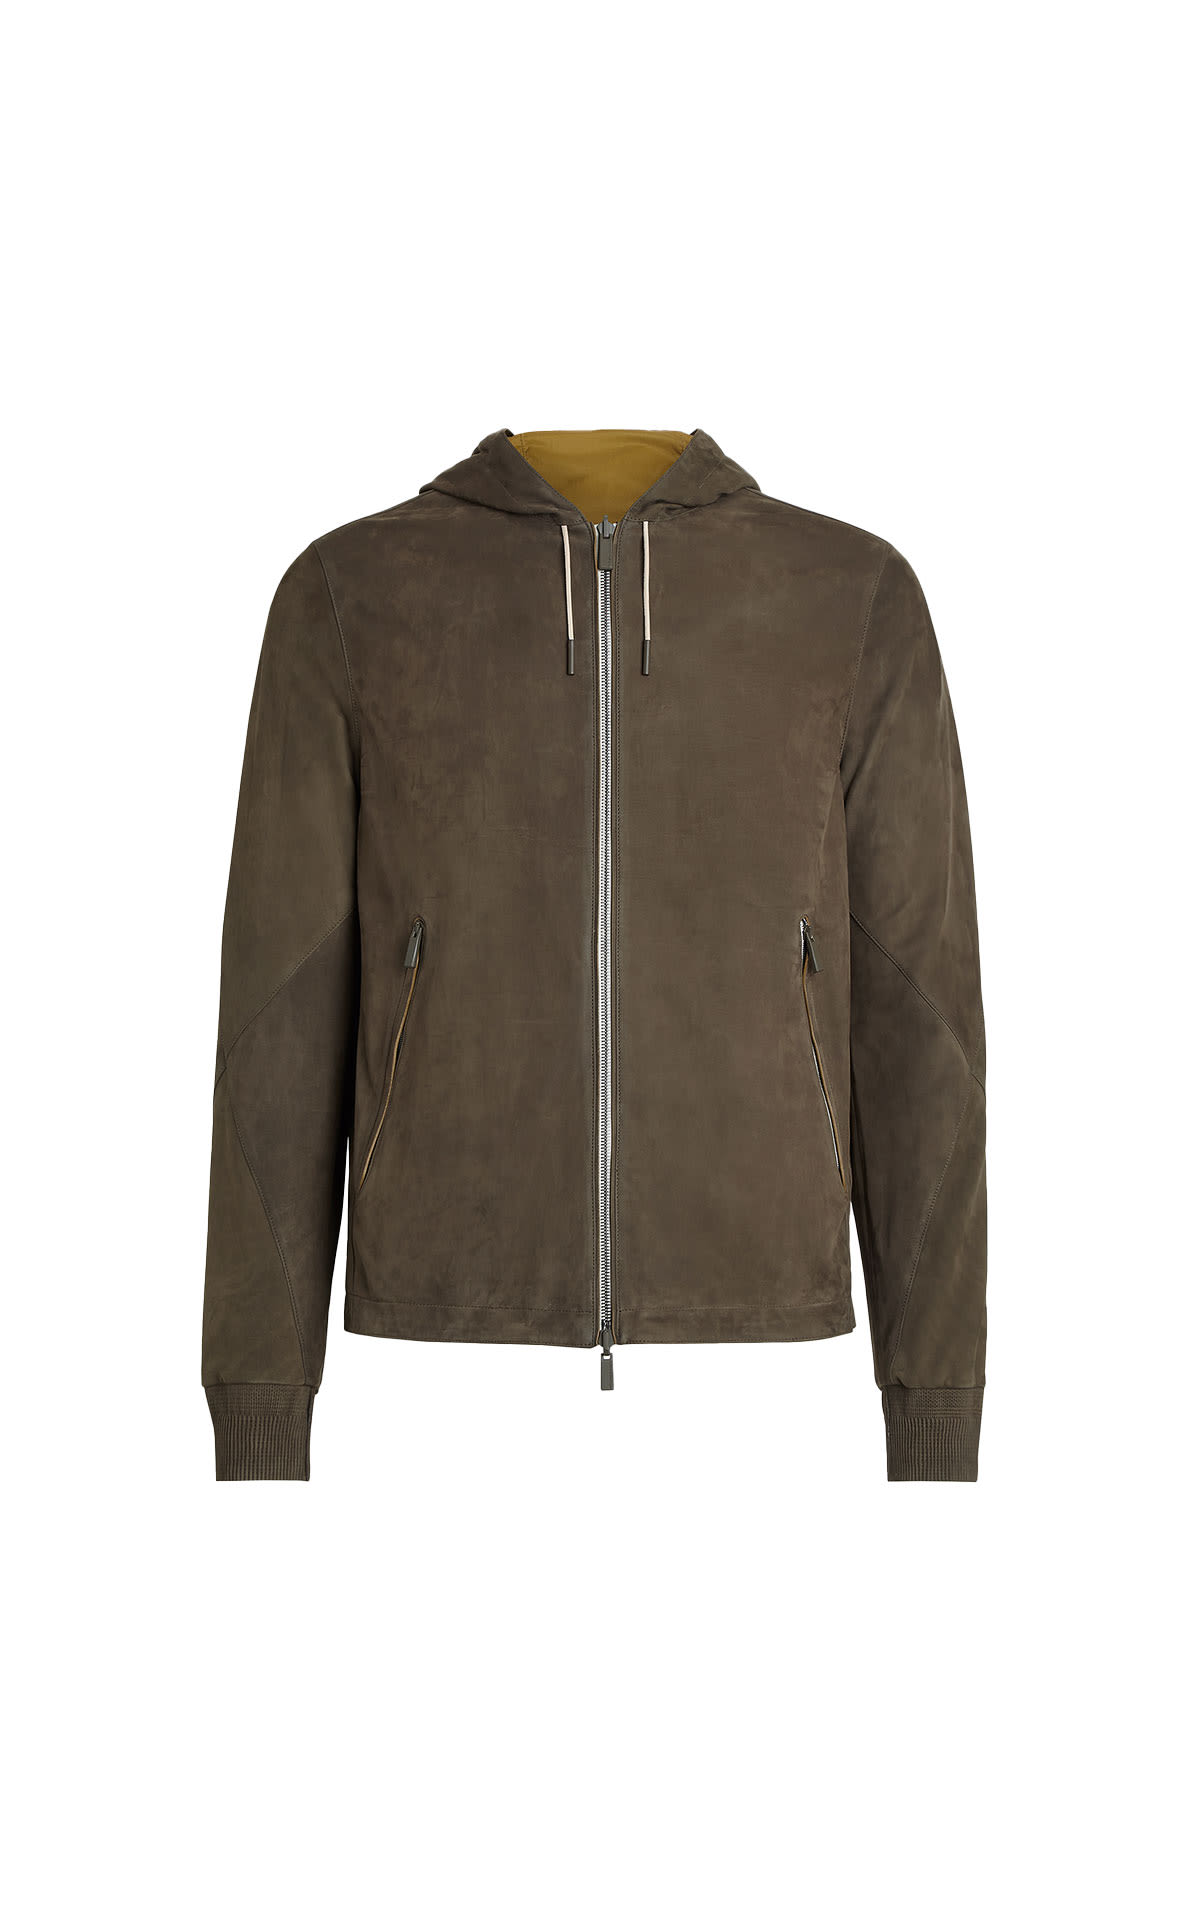 Zegna Leather reversible outerwear from Bicester Village